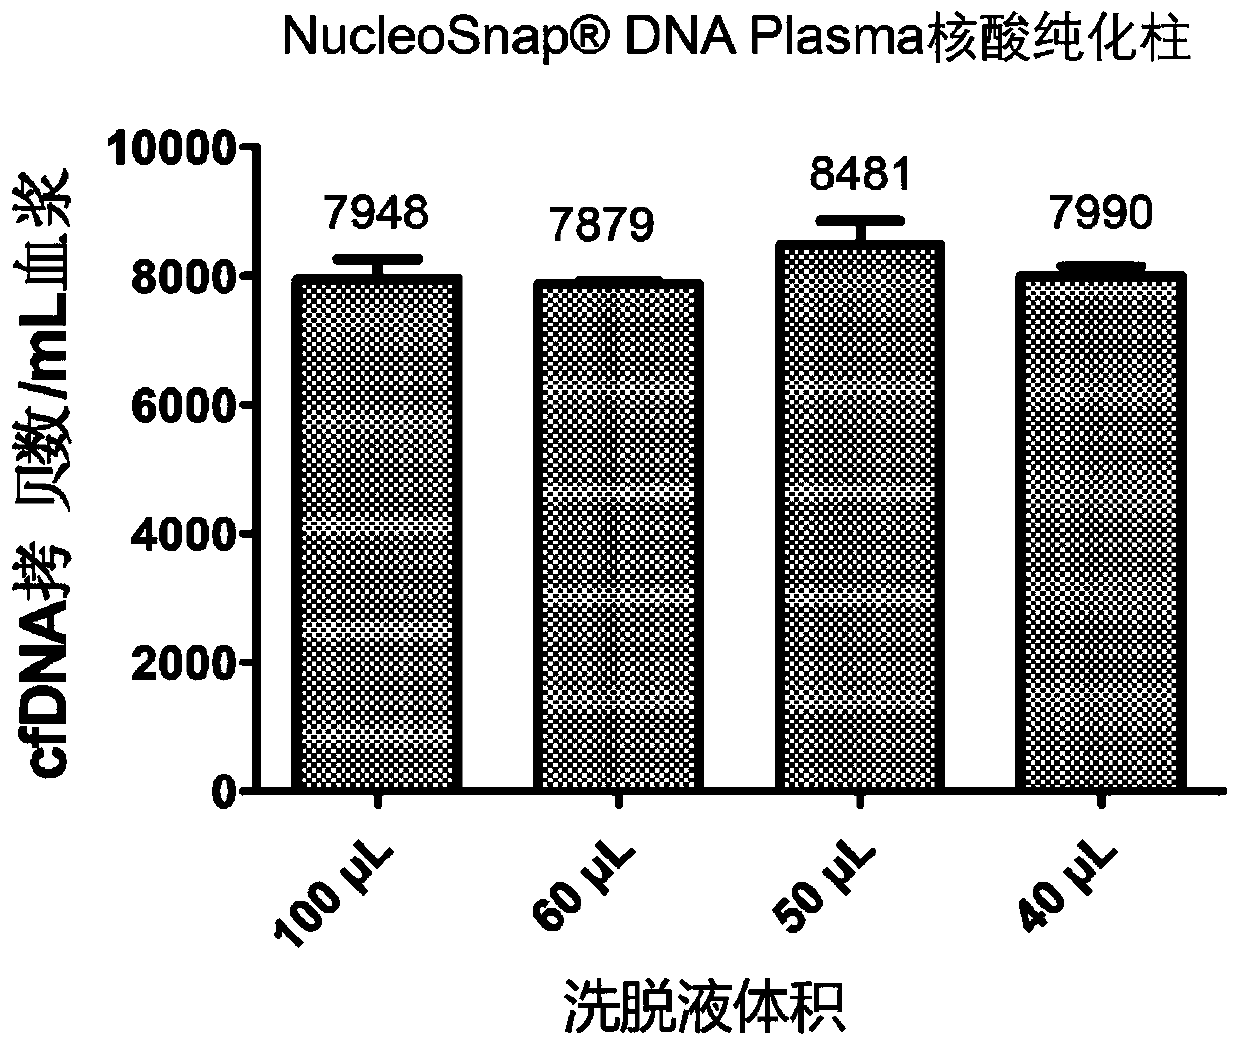 Method and system for separating free nucleic acids from sample containing free nucleic acids